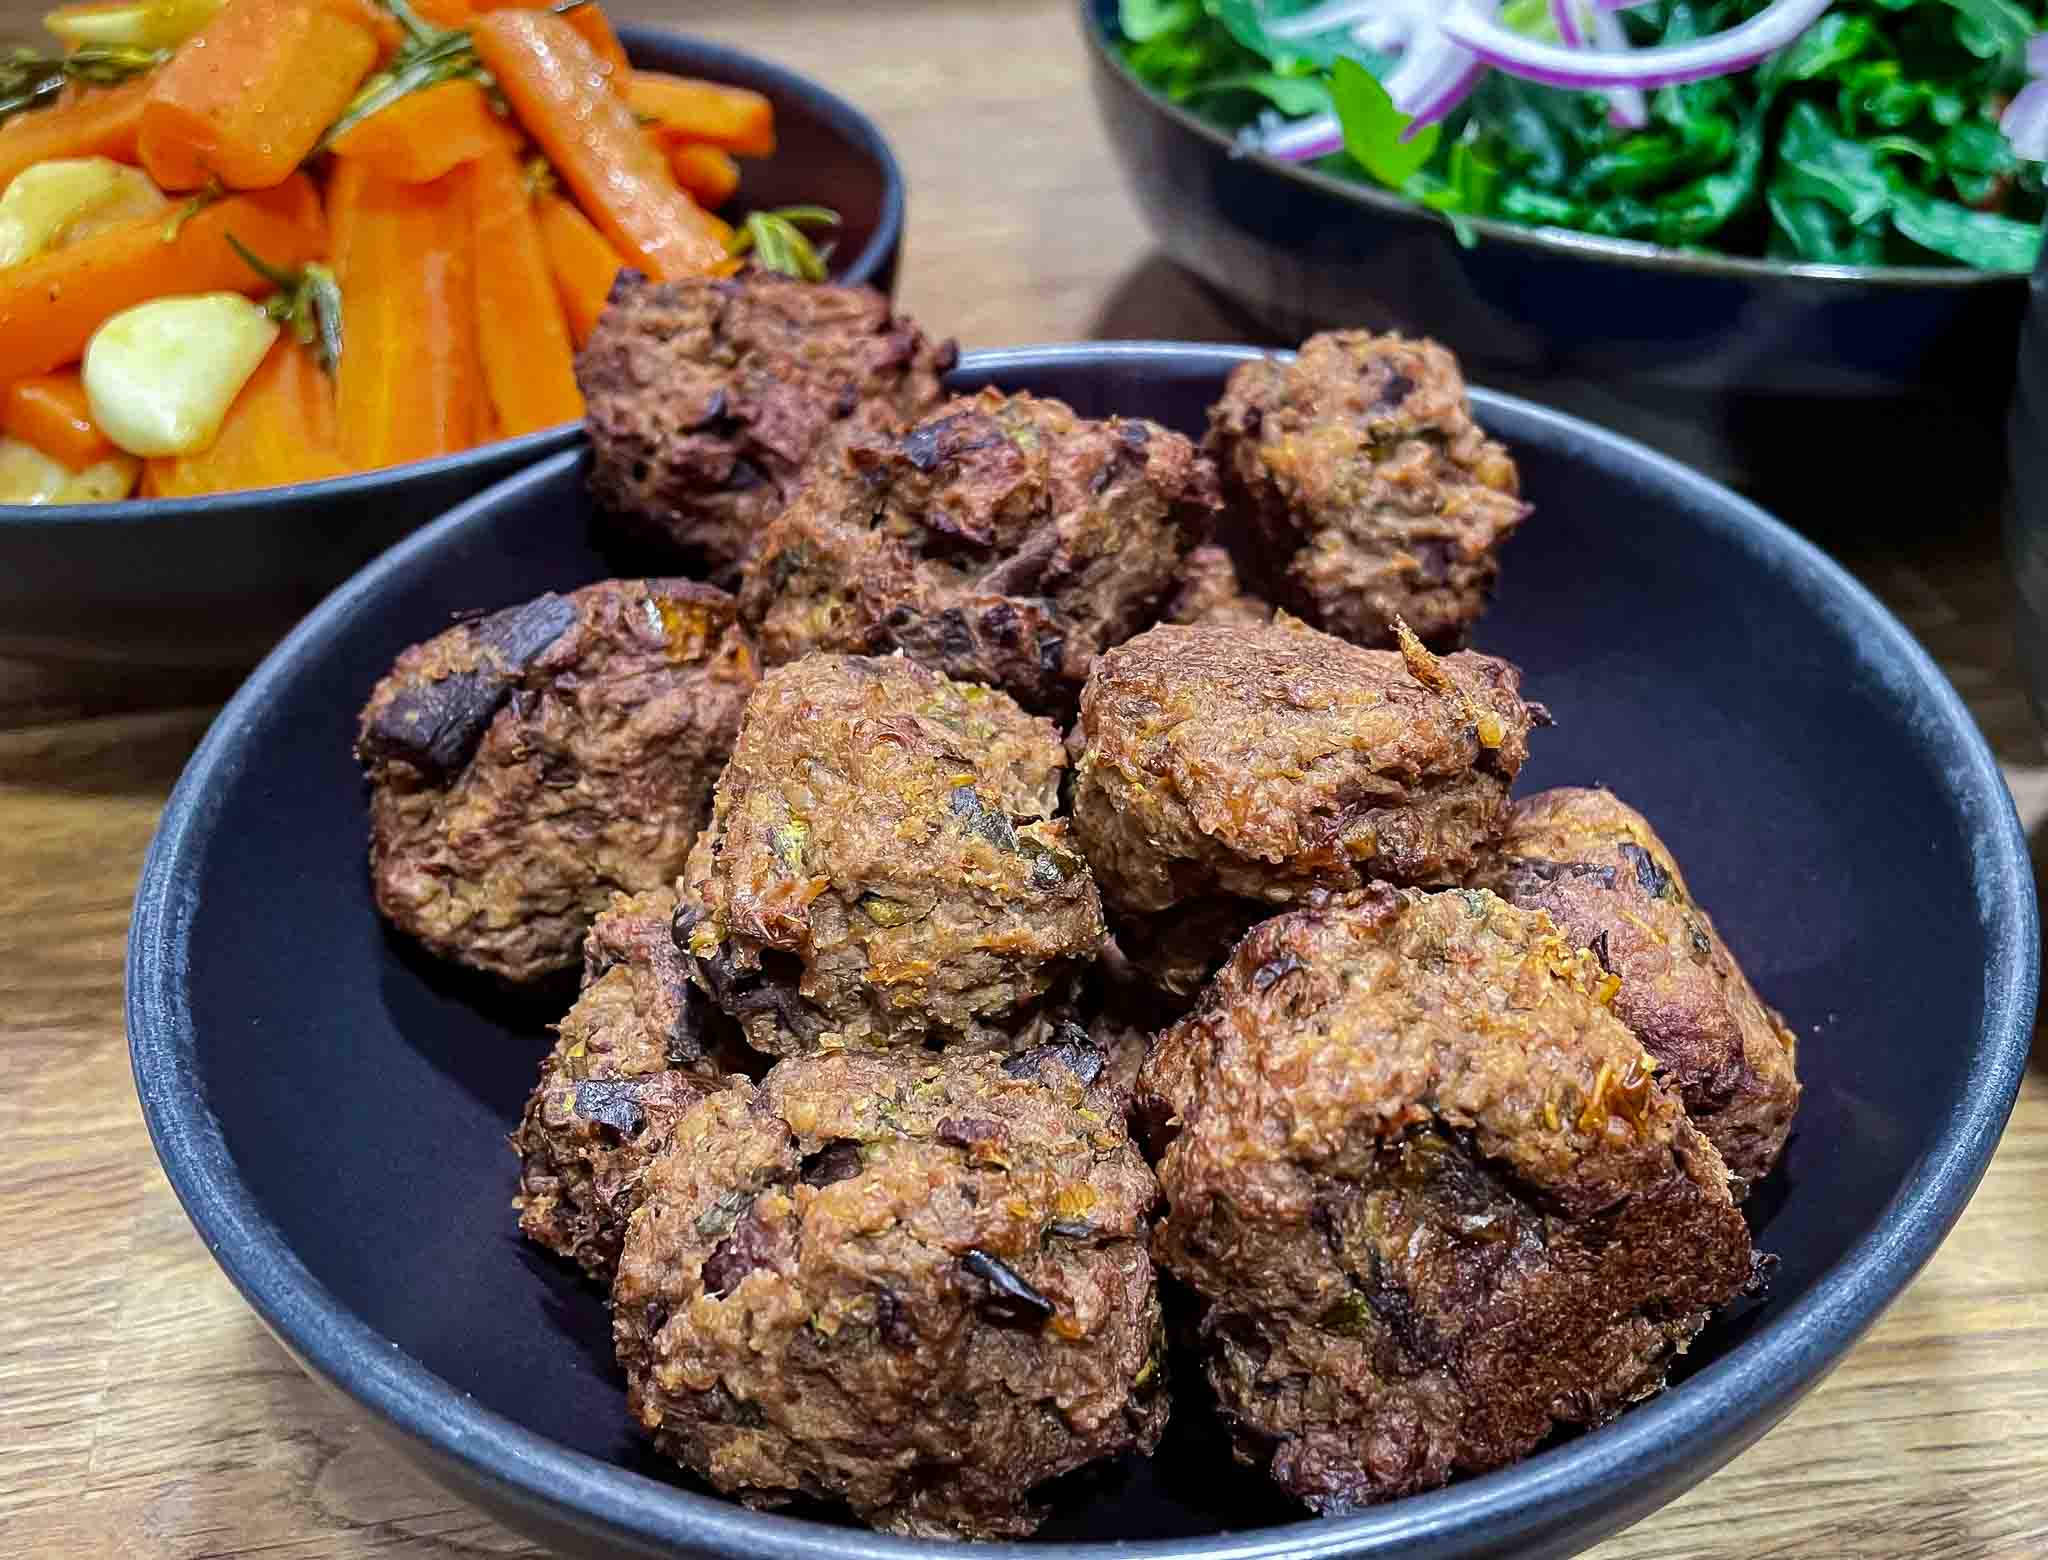 alt="Aubergine Meatballs served with mixed salad and rosemary carrots."